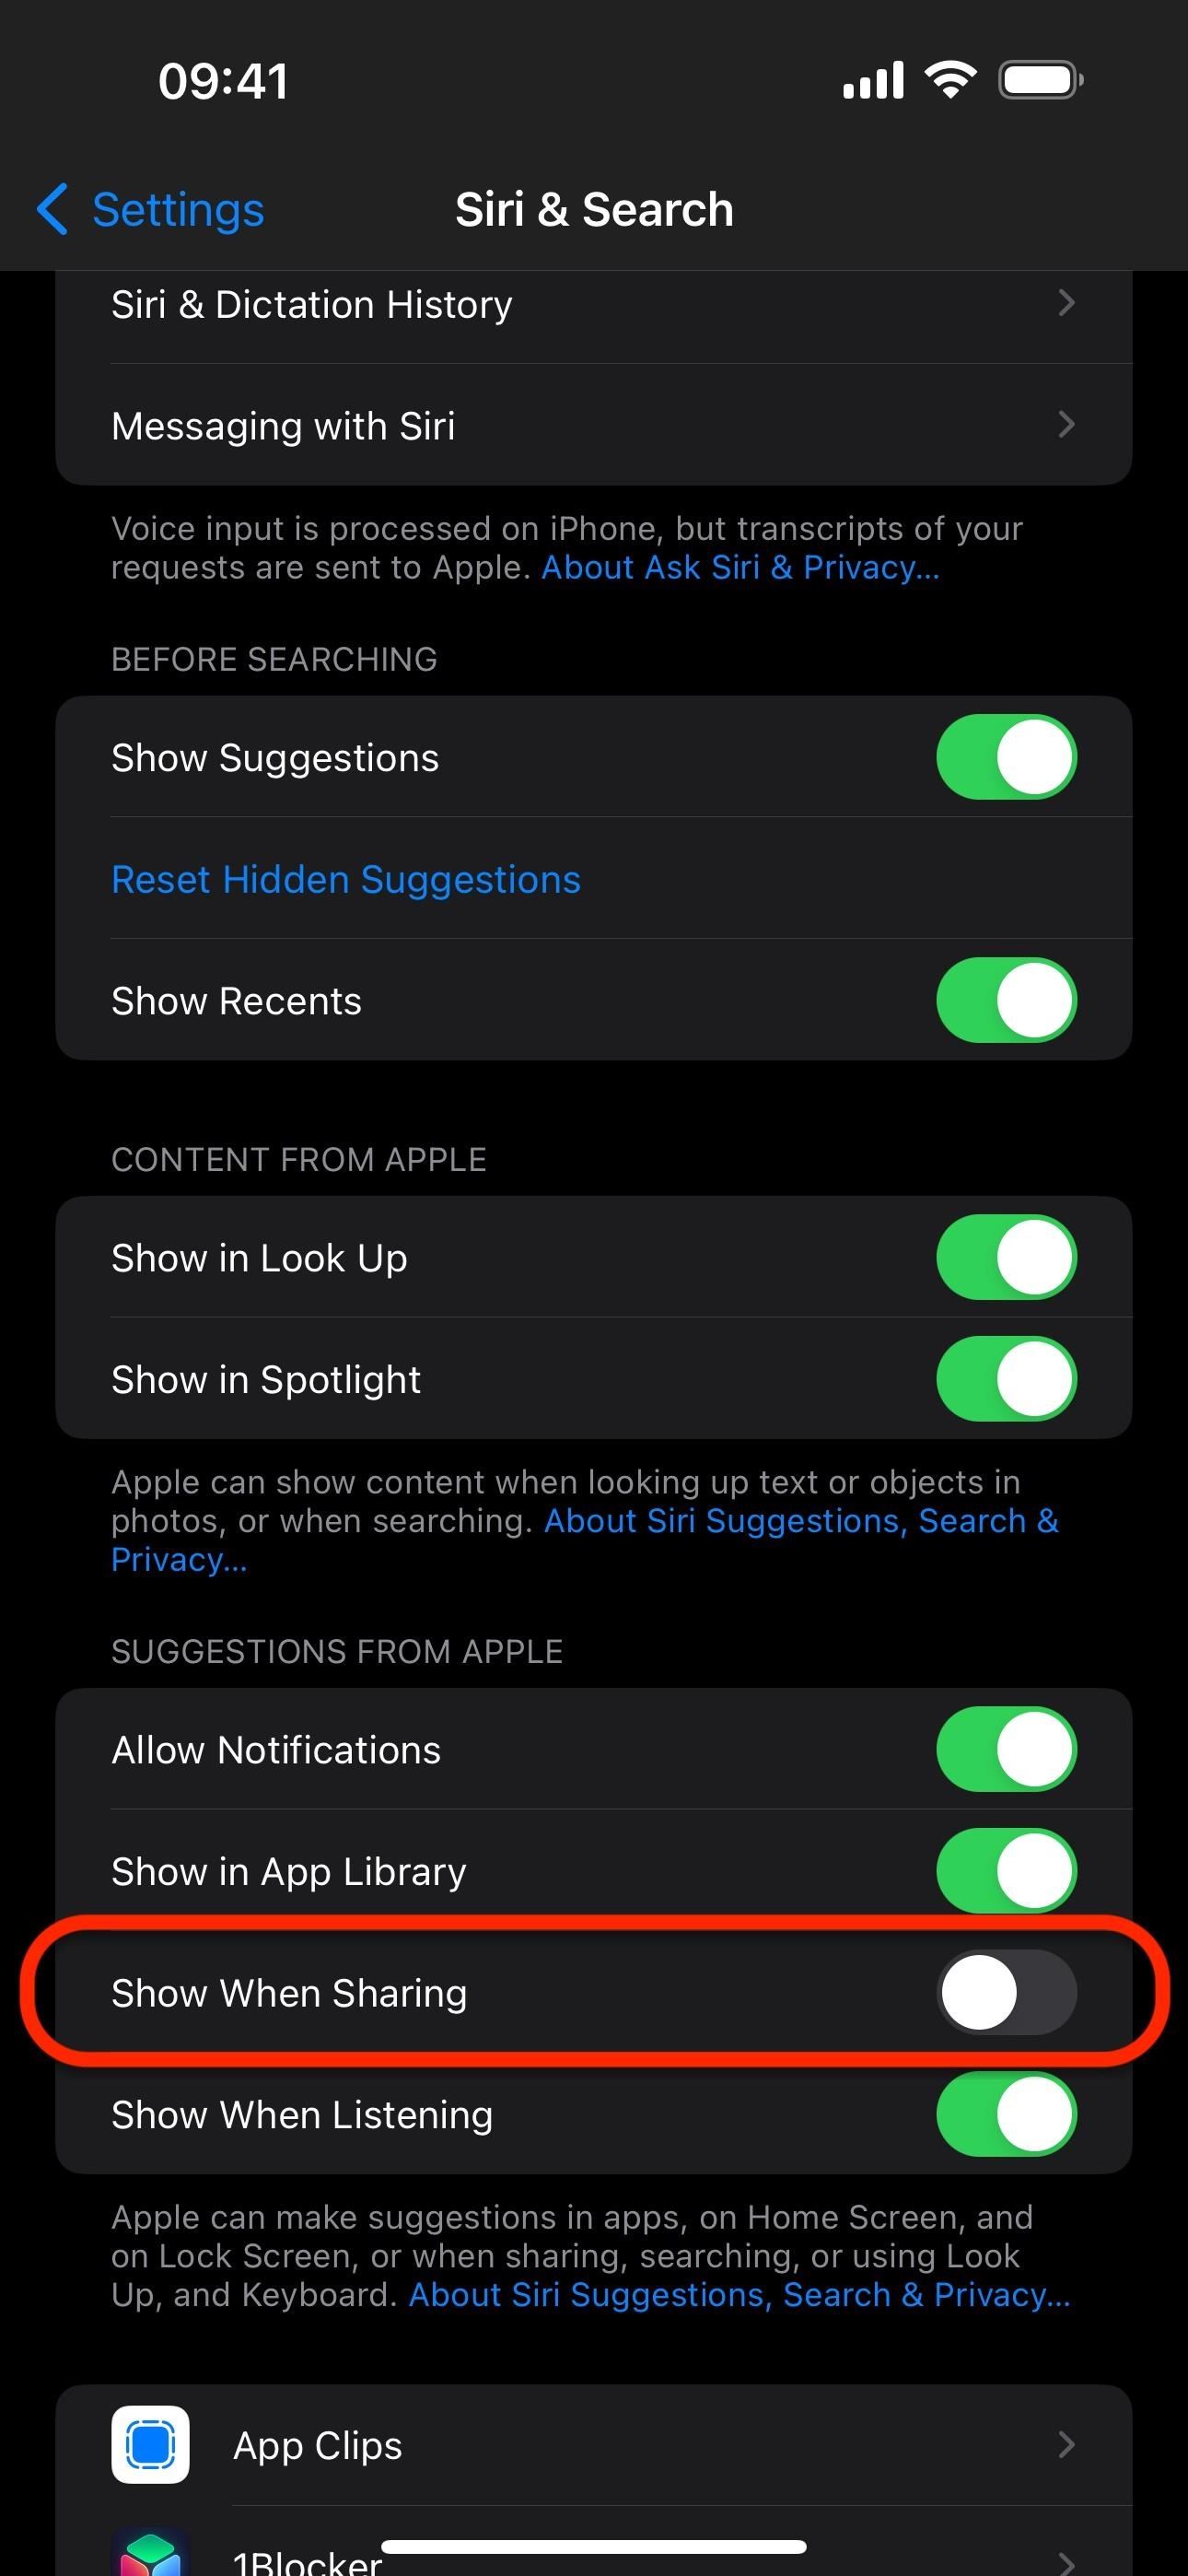 Tired of Contacts Showing Up in Your iPhone's Share Sheet? You Can Hide Some of Them or Remove Them All